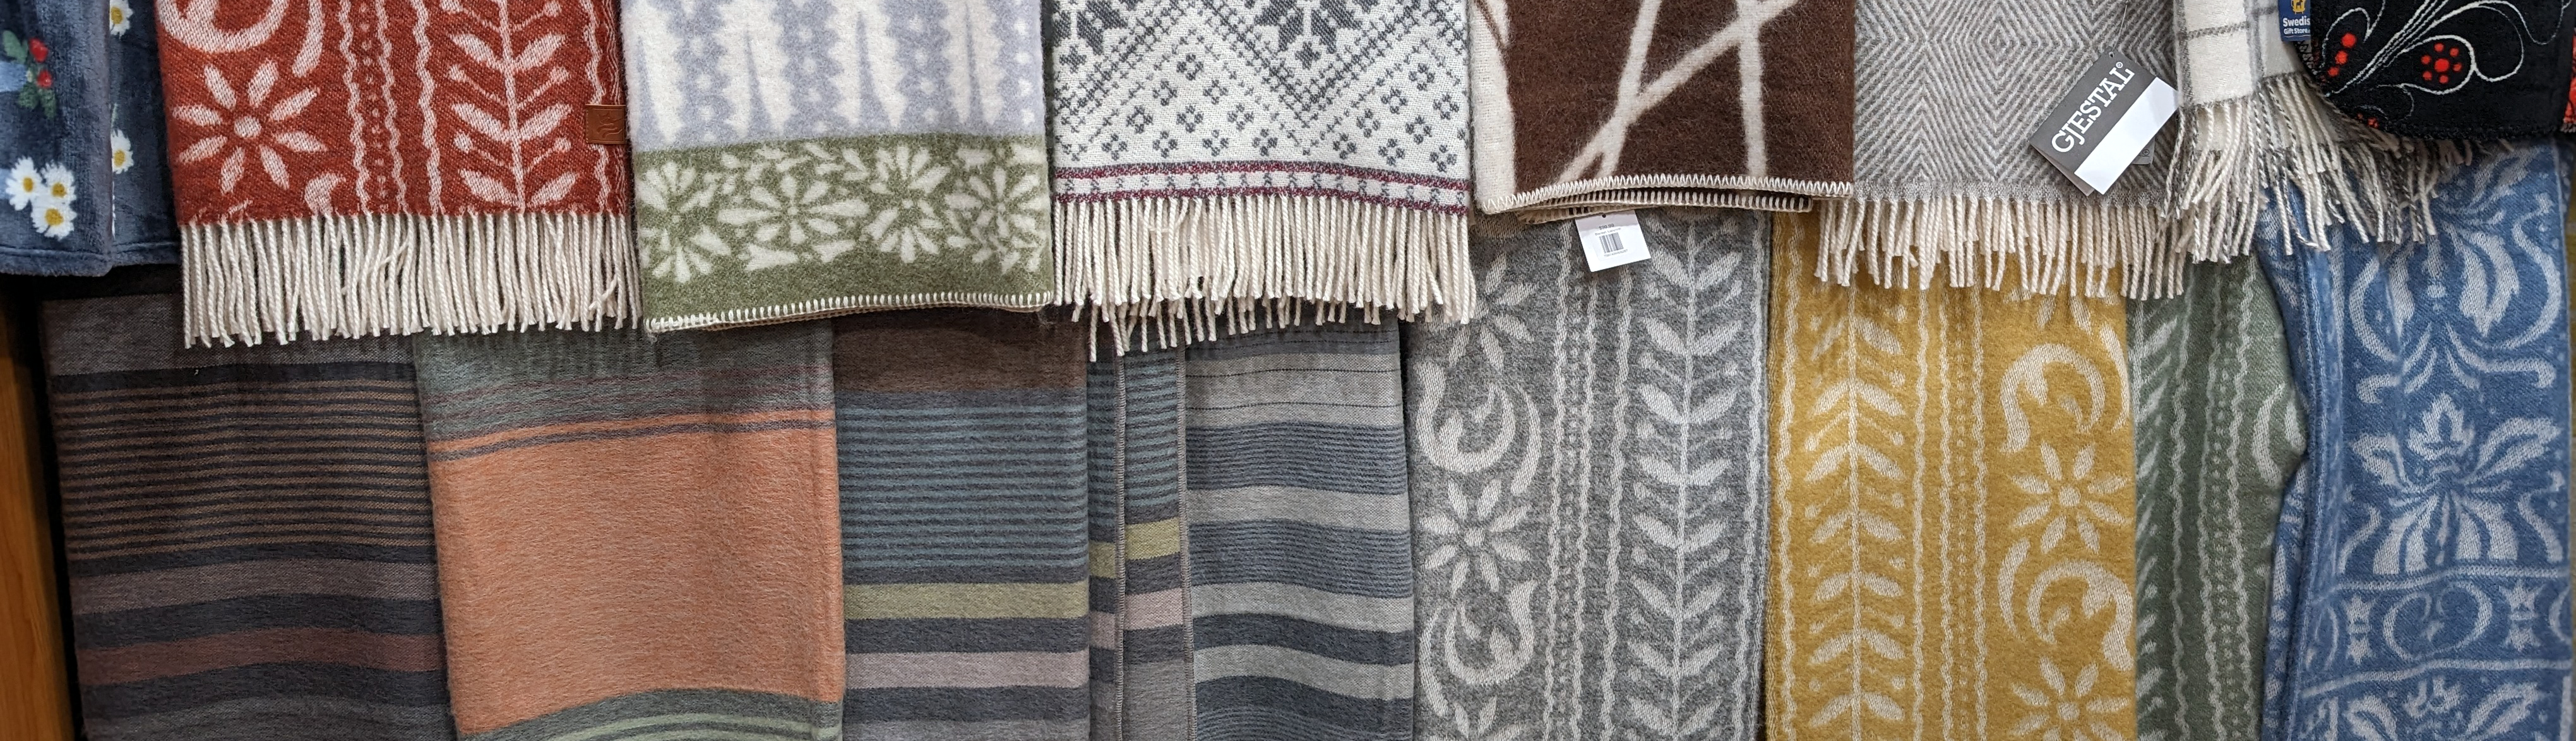 Decor: Swedish Blankets and Throws